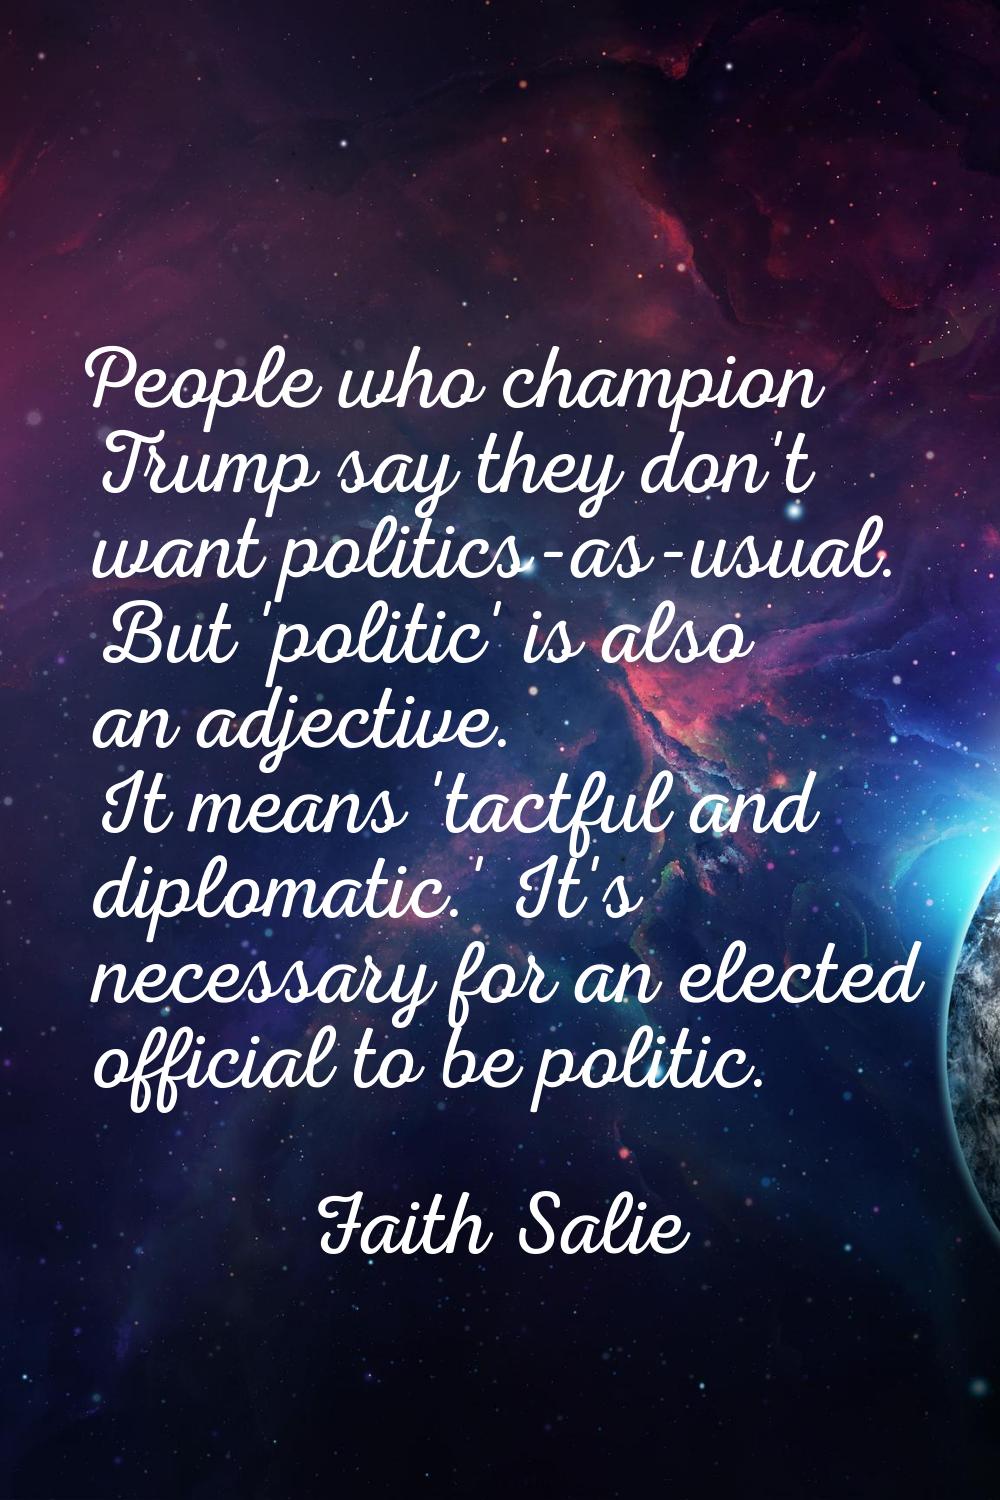 People who champion Trump say they don't want politics-as-usual. But 'politic' is also an adjective